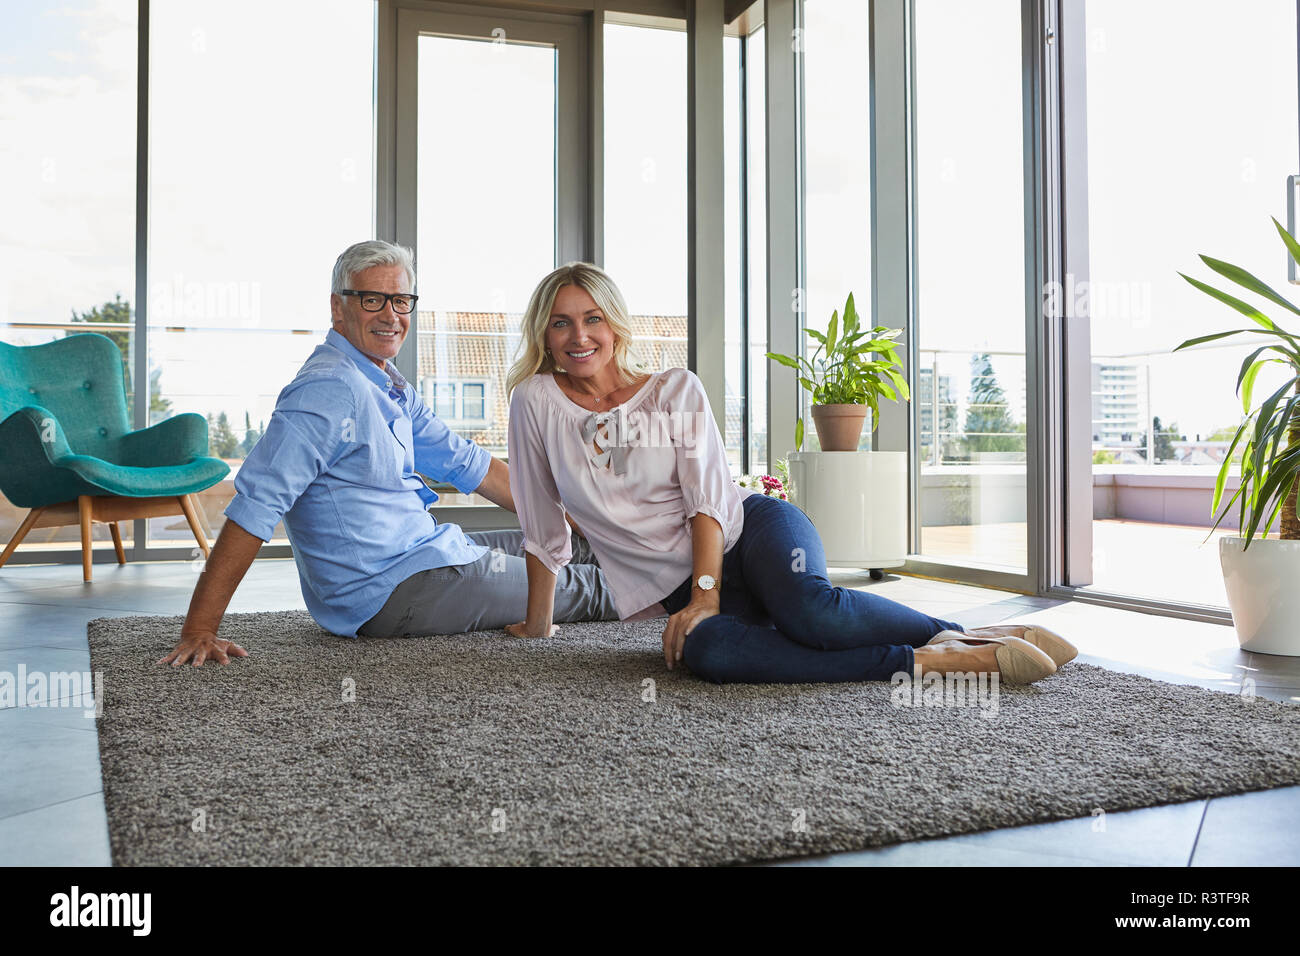 Portrait of smiling mature couple relaxing at home sitting on carpet Stock Photo